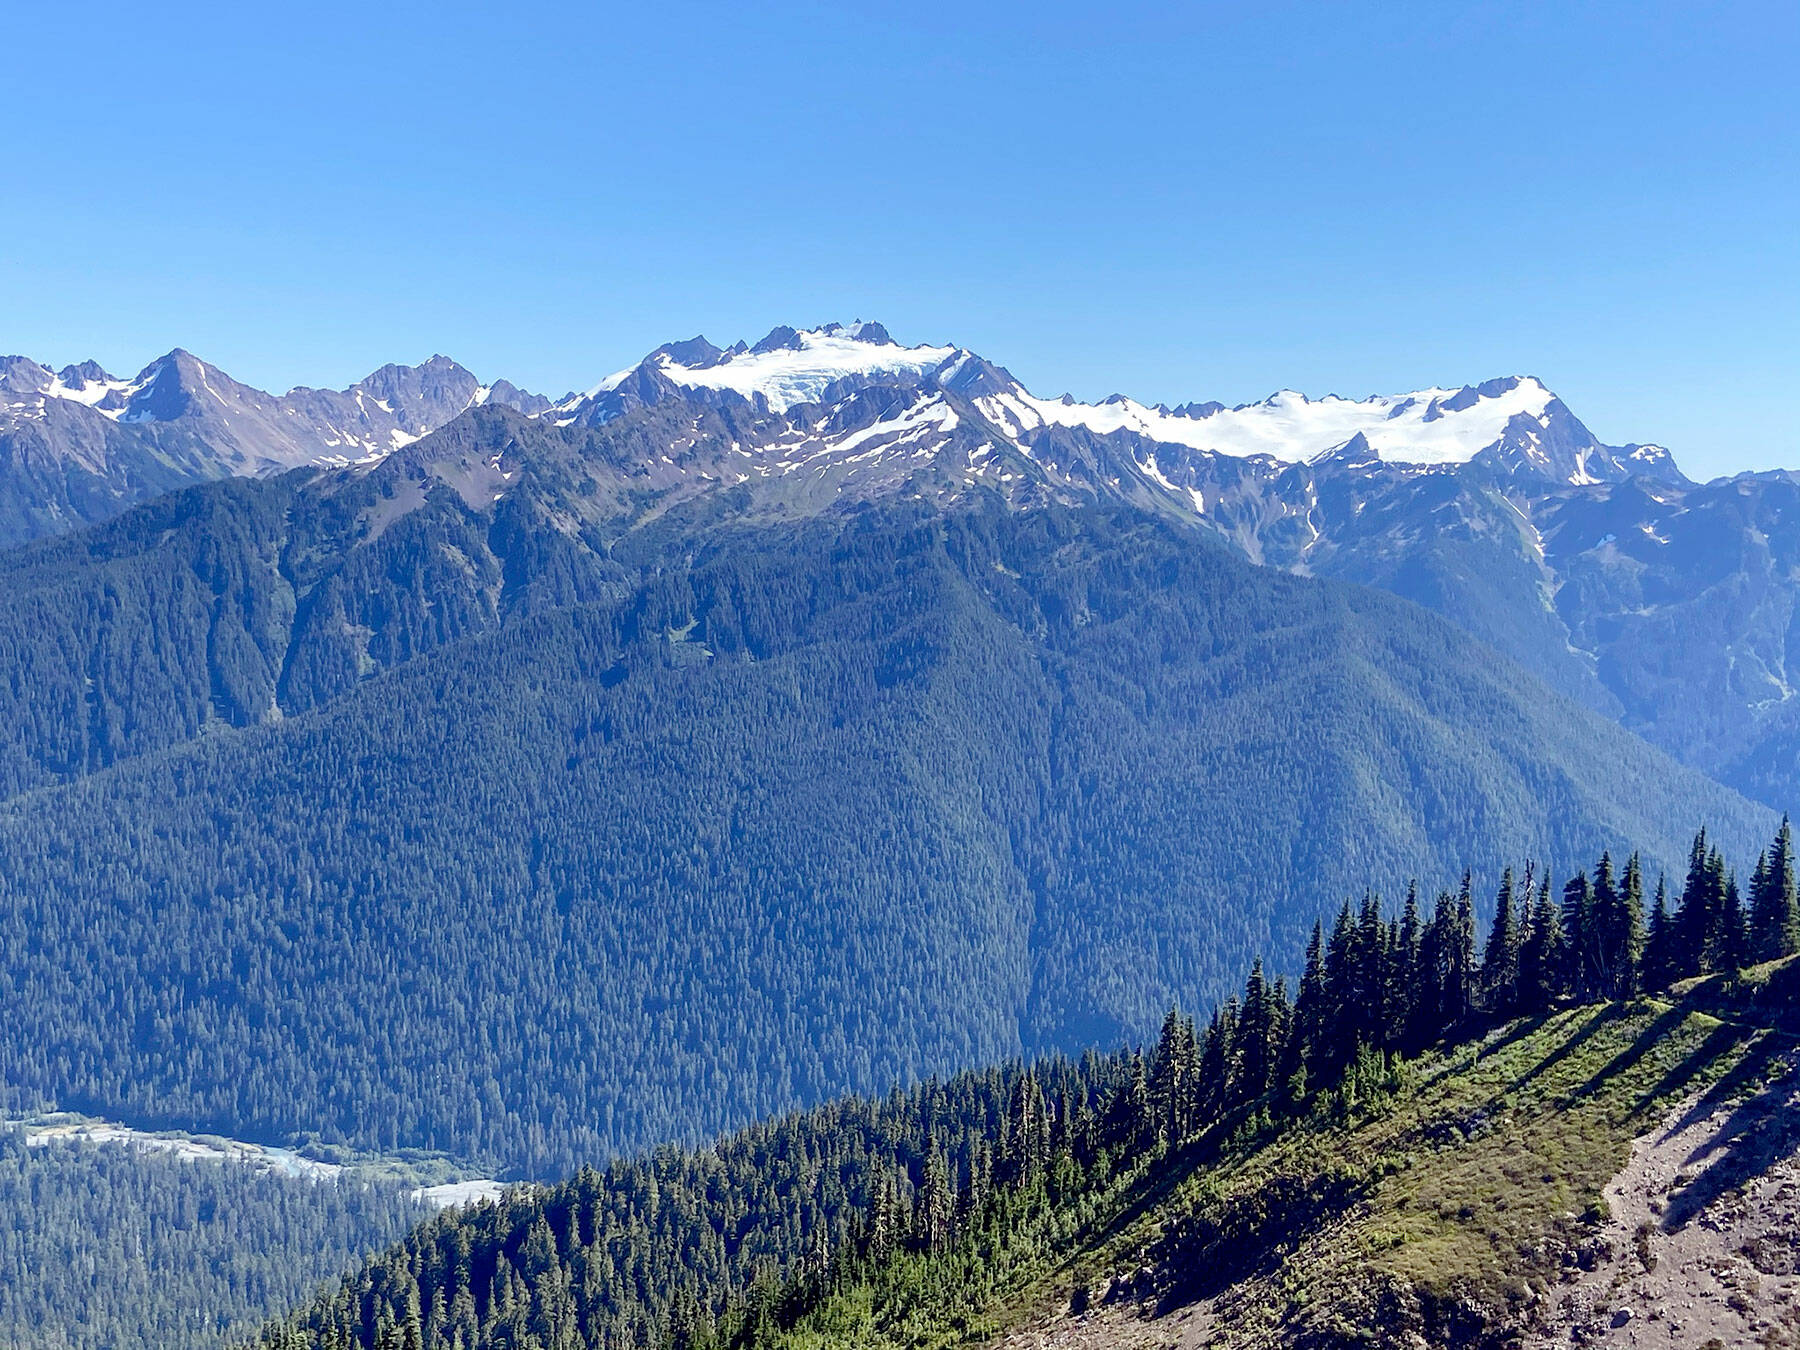 Mount Olympus in Olympic National Park, as seen from the High Divide trail in August 2020, could lose its glaciers by 2070 because of global warming. (Peninsula Daily News)